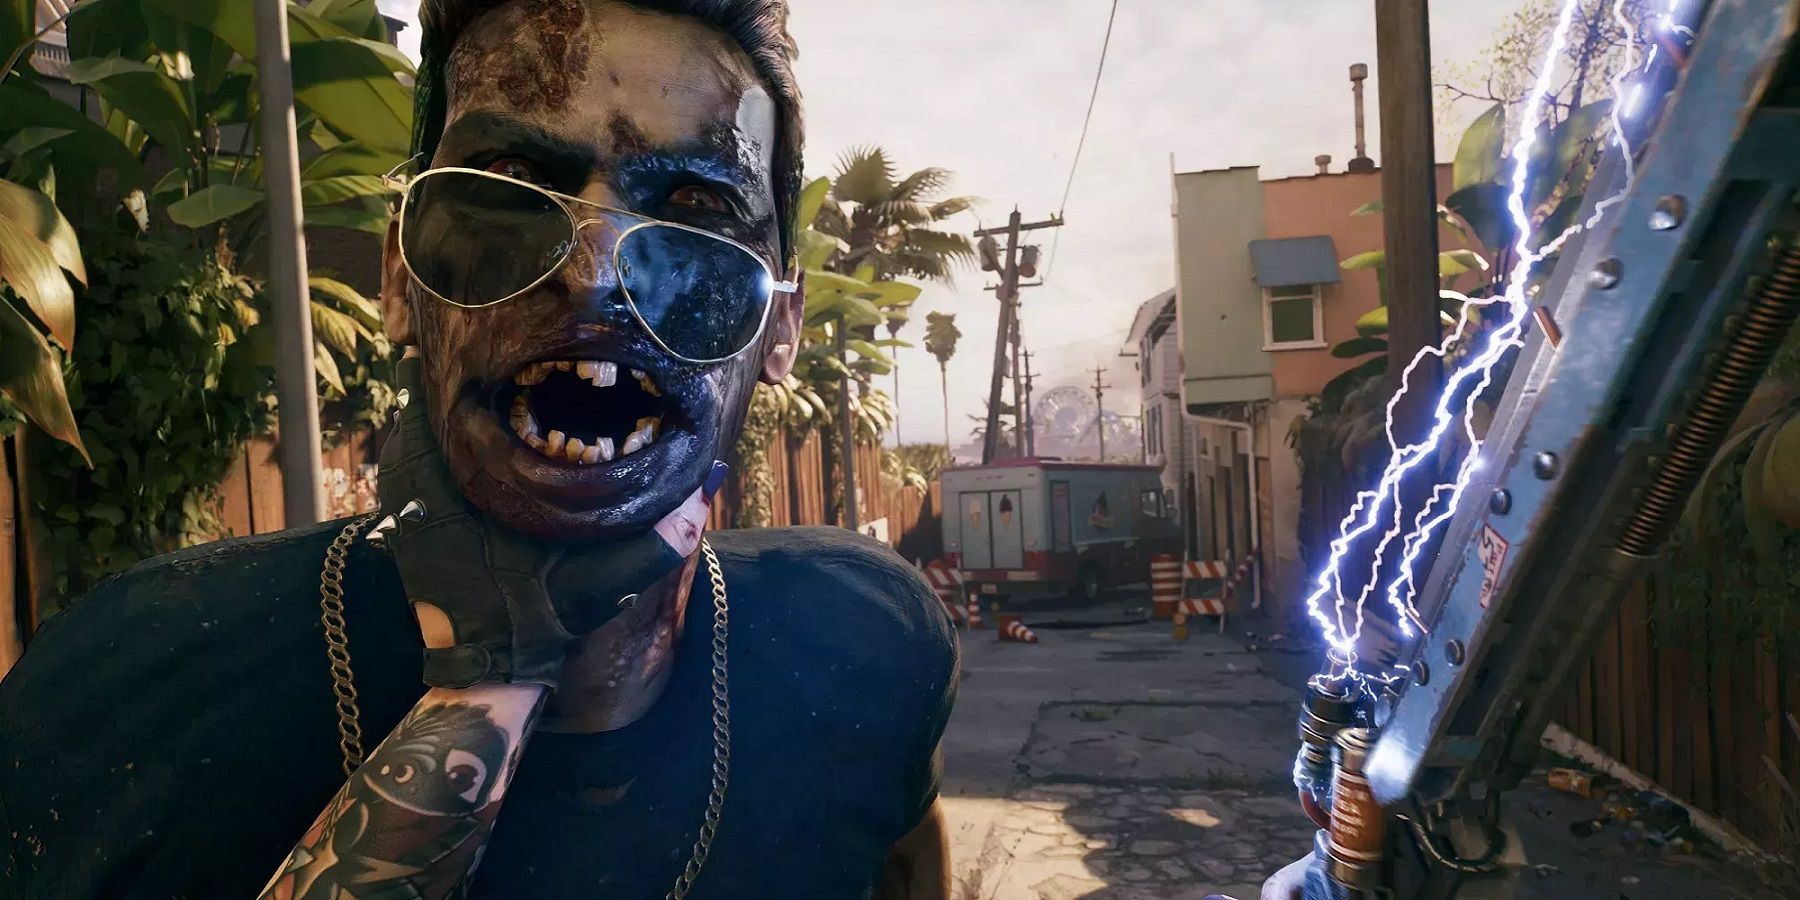 Image from Dead Island 2 showing a zombie in a chokehold.